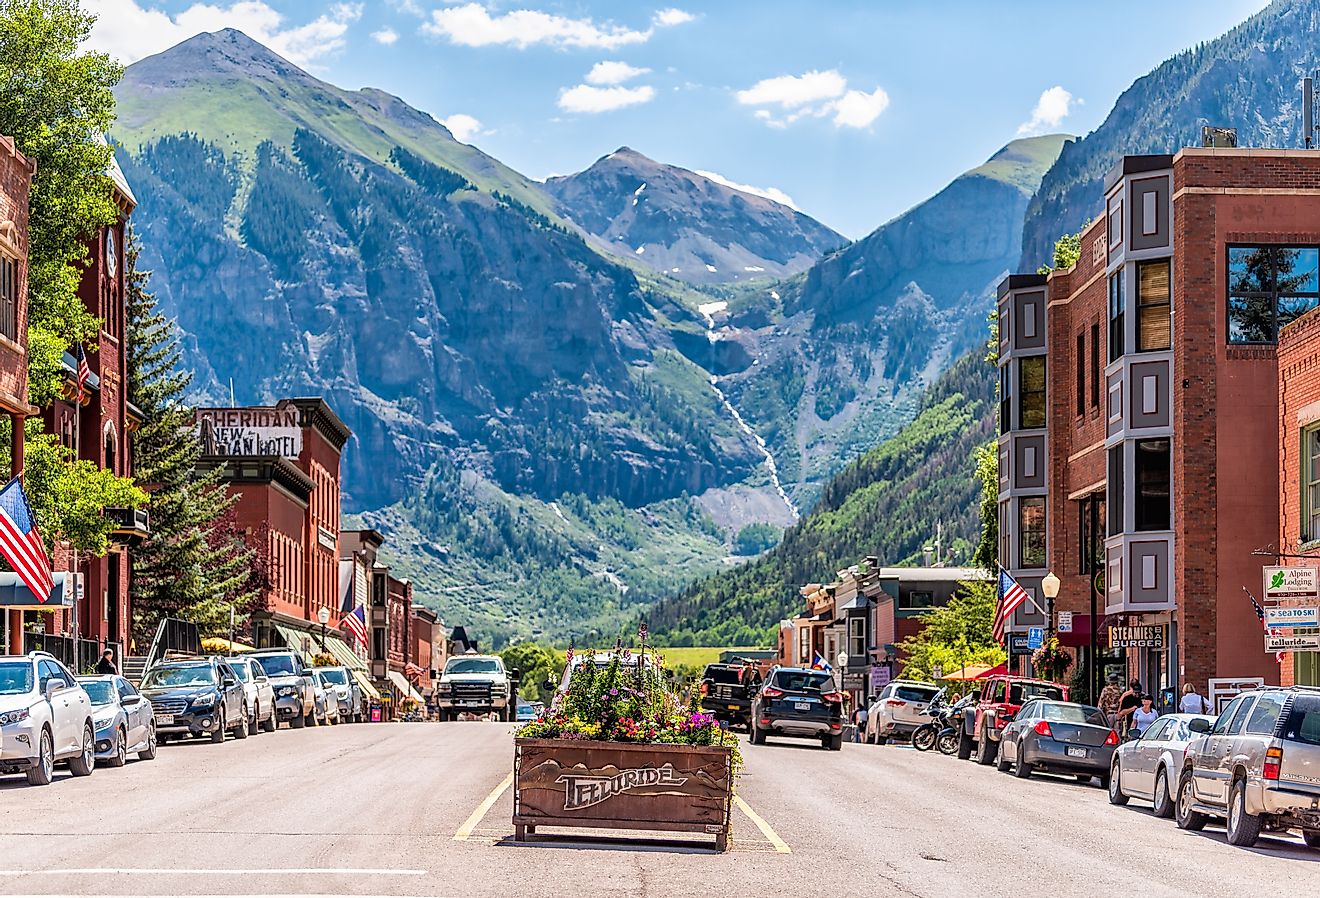 Small town village of Telluride in Colorado with sign for city and flowers by historic architecture on main street mountain view. Image credit Kristi Blokhin via Shutterstock.